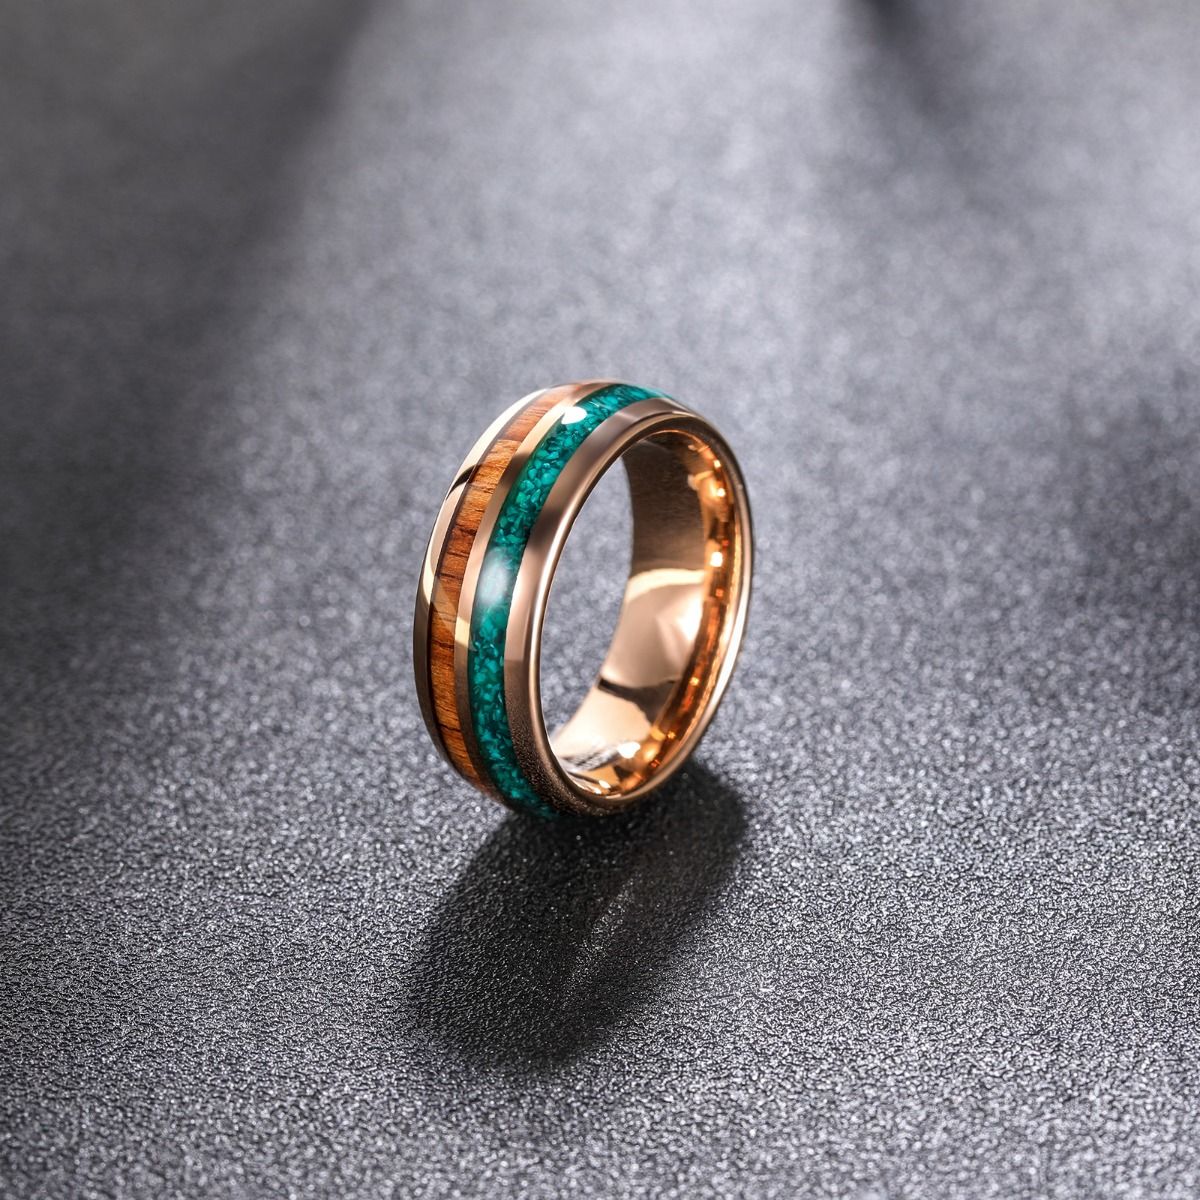 8mm Mens Tungsten Carbide Turquoise/Wood Inlay Beveled Edge Ring